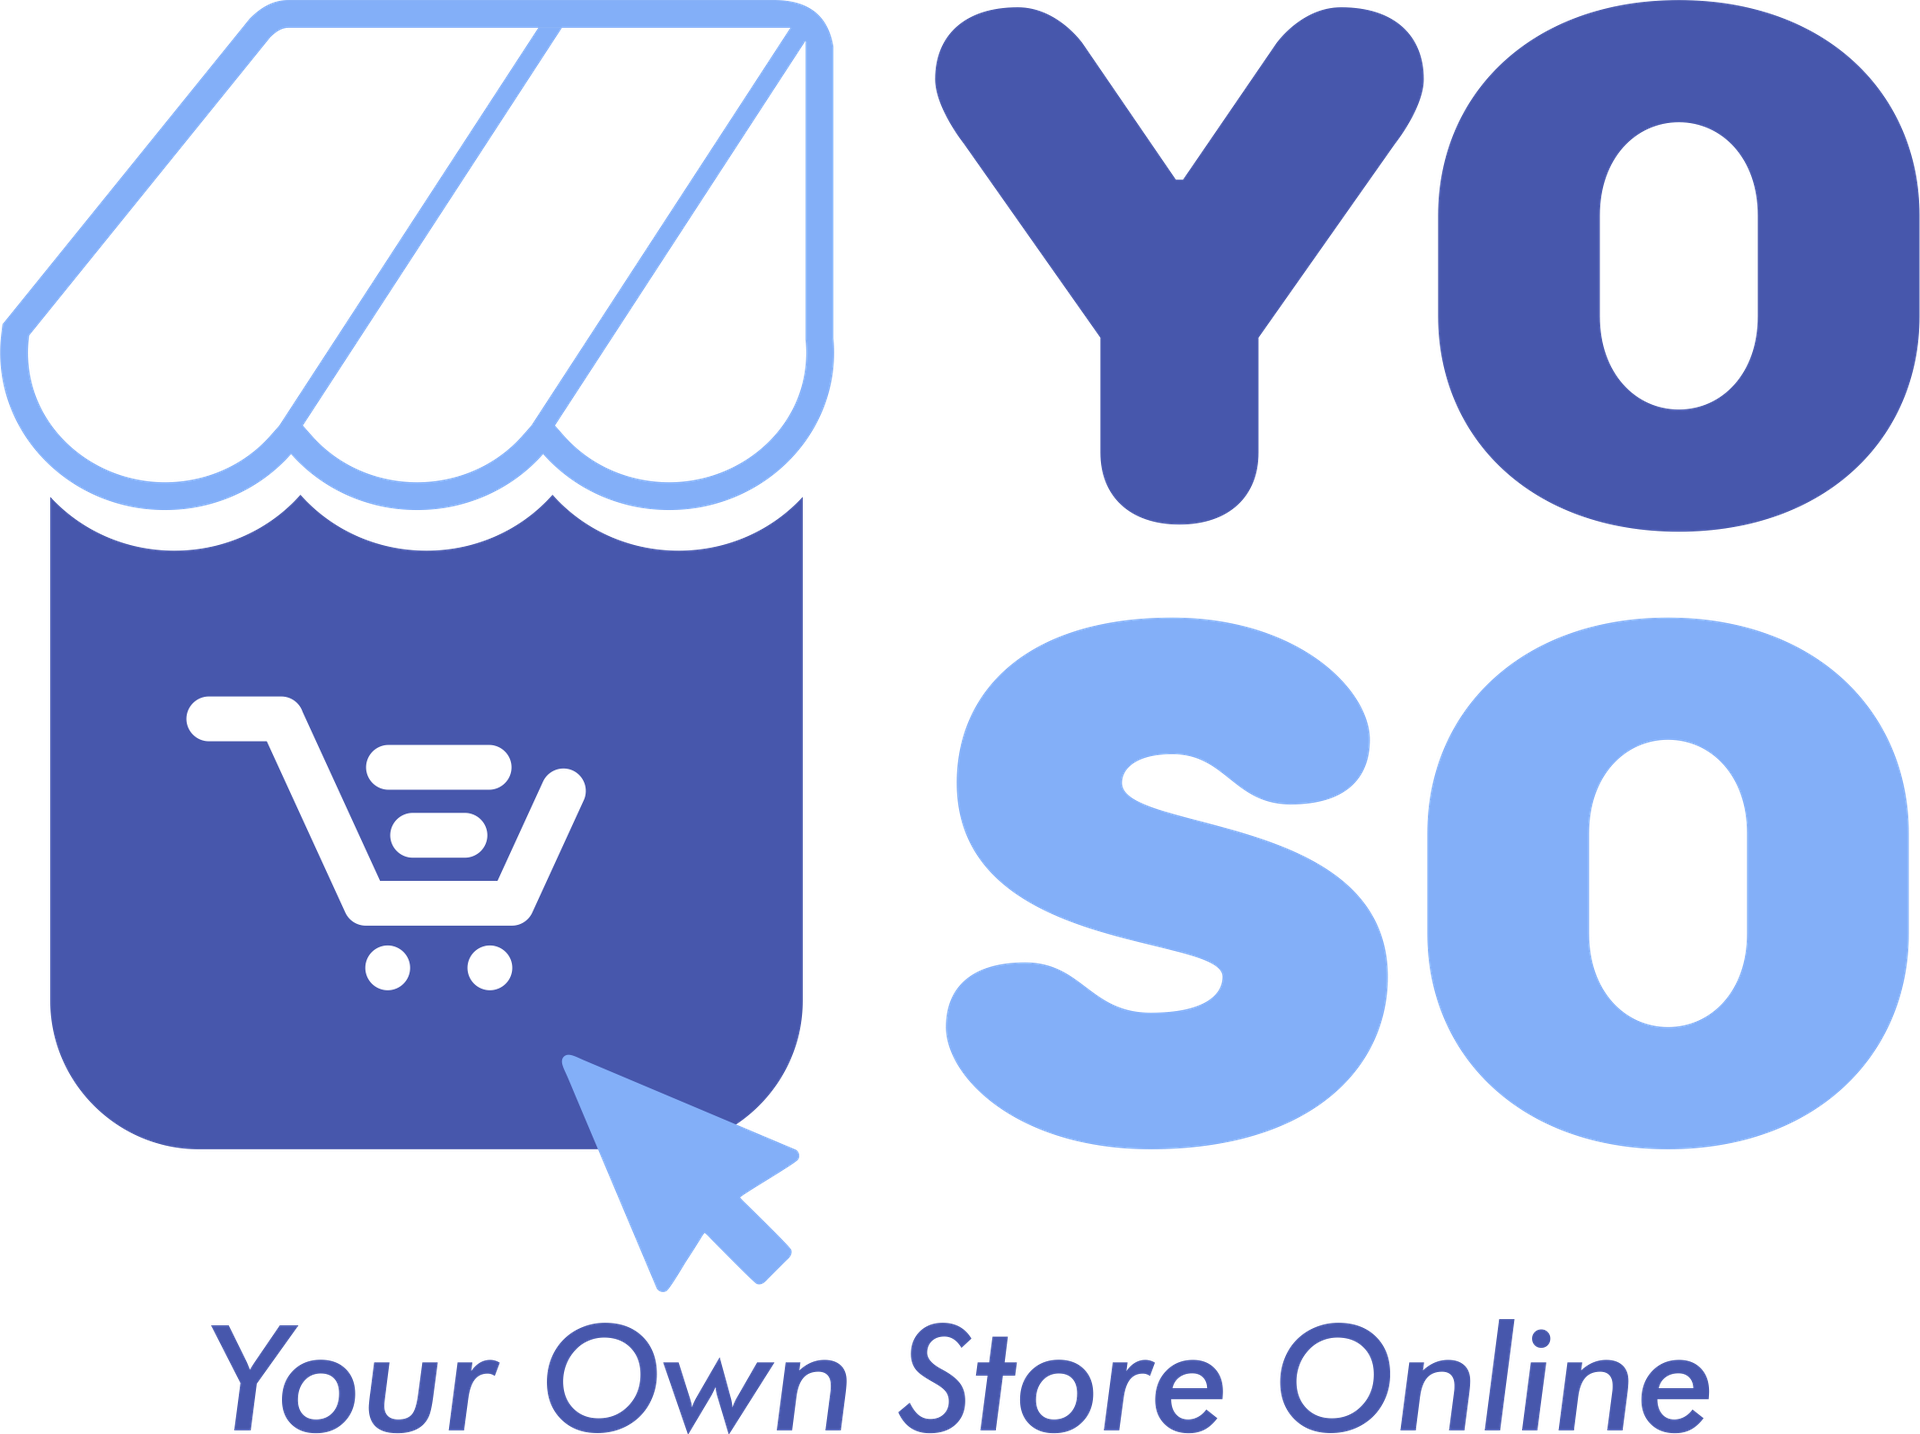 YOSO - Your Own Store Online